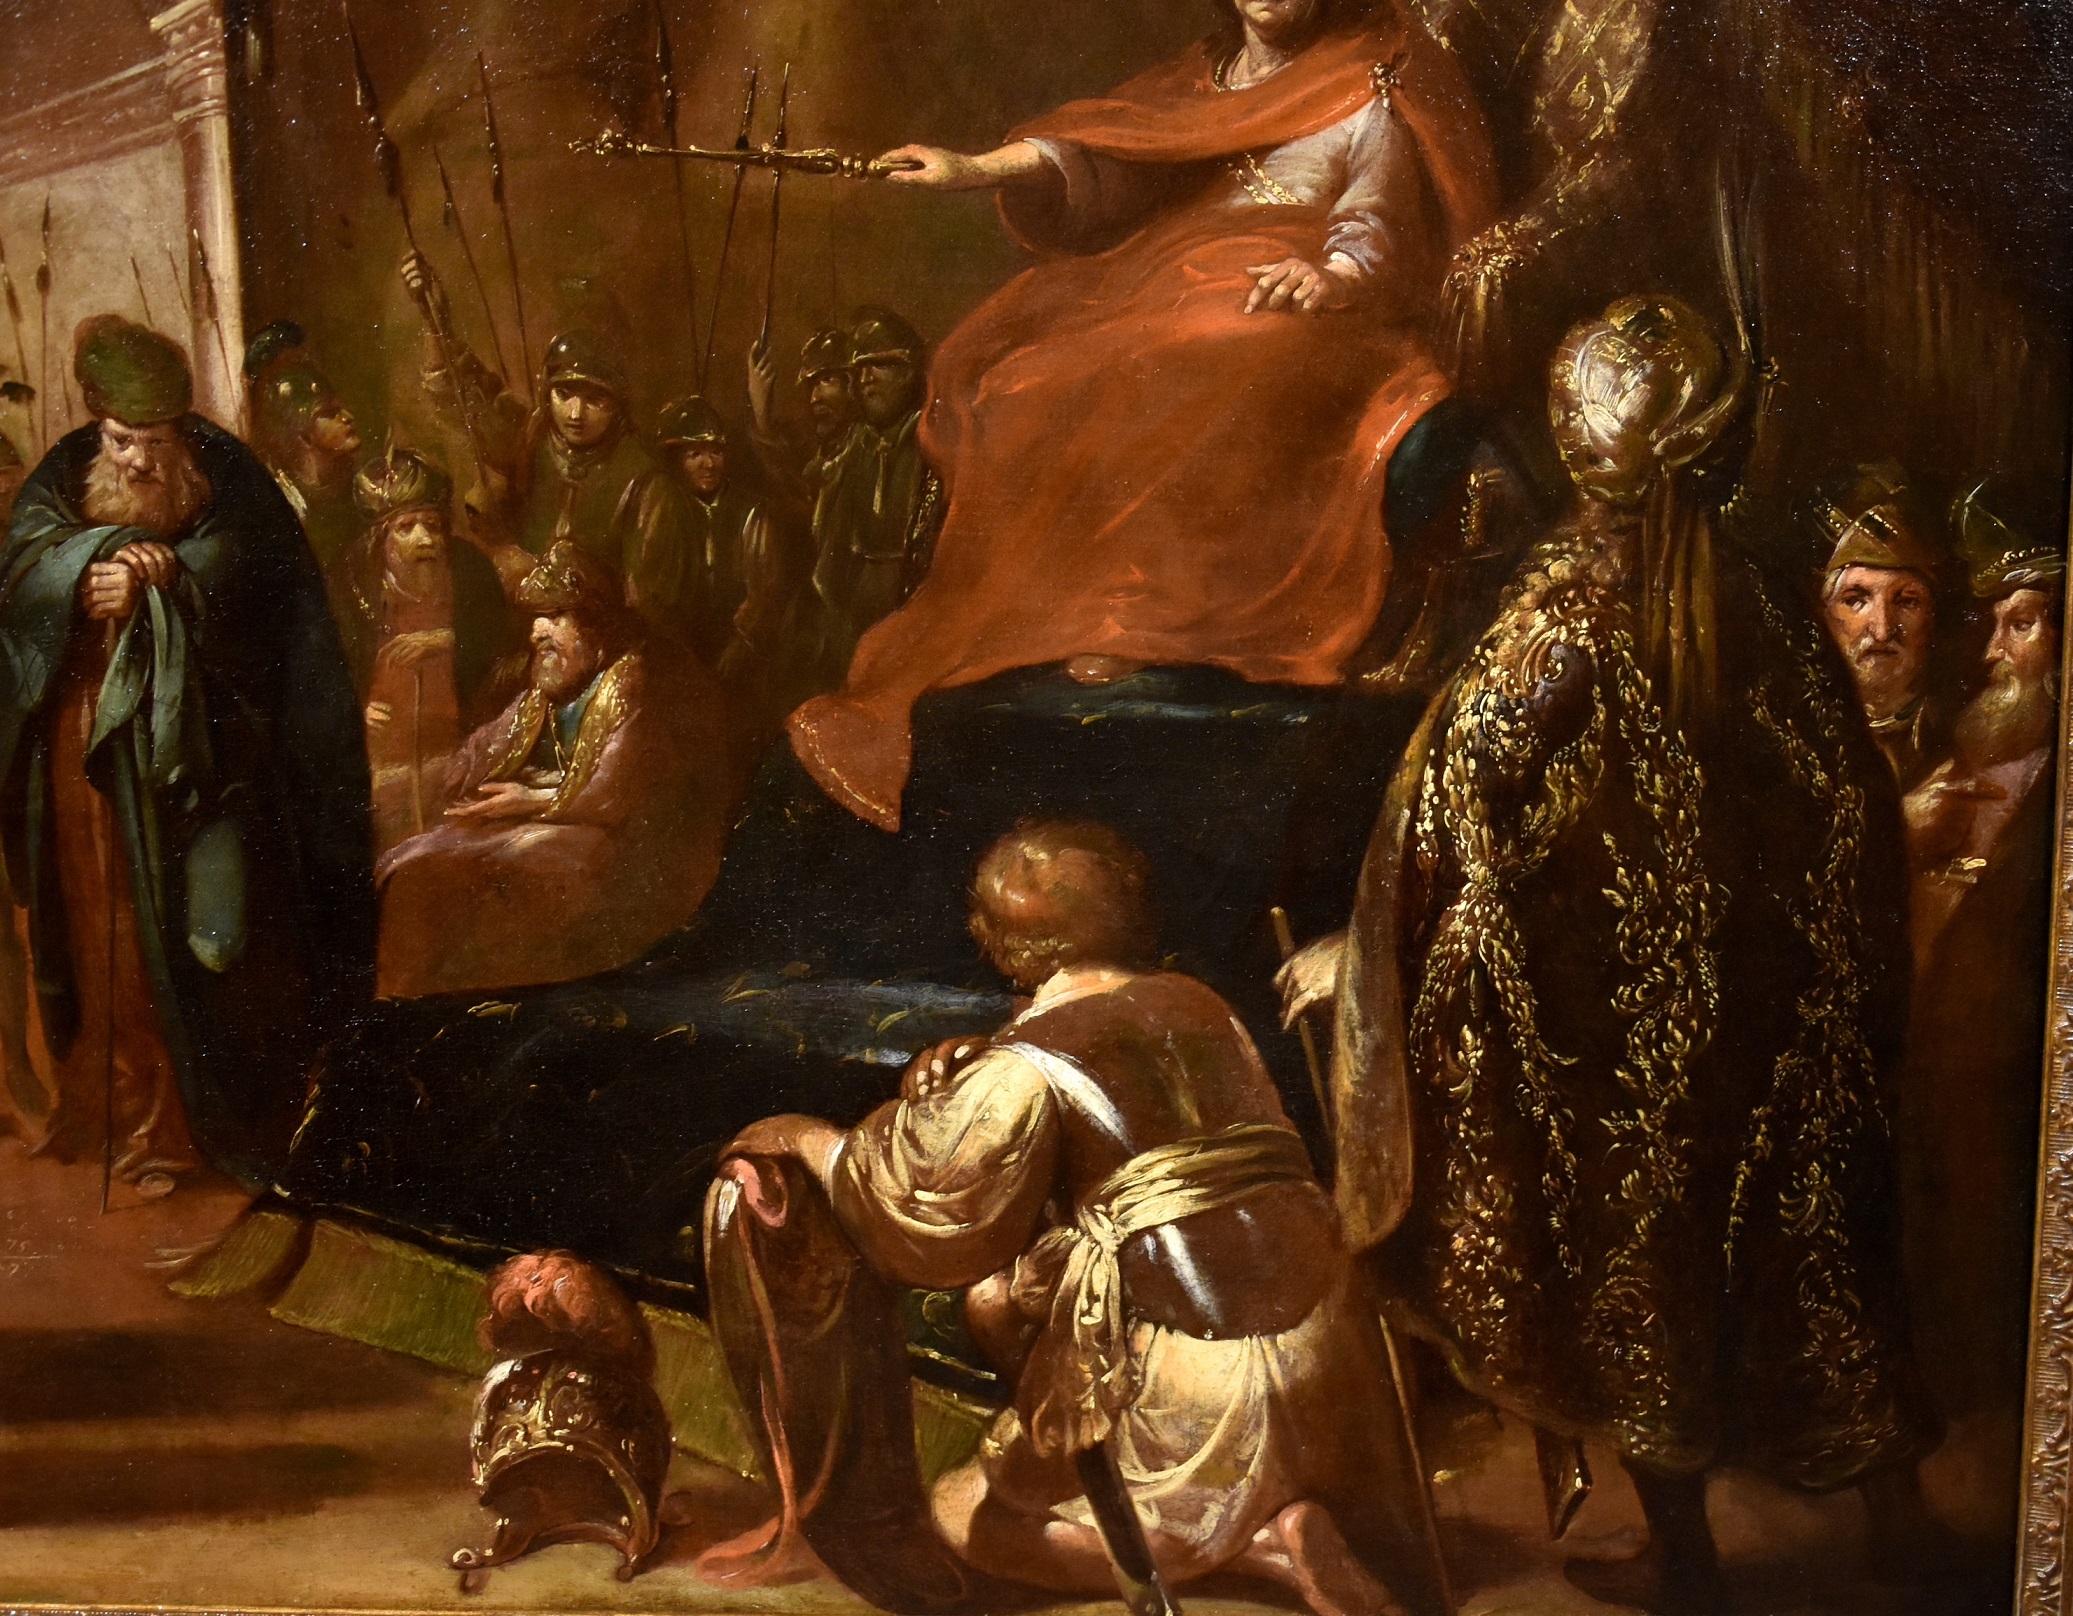 Johann Heinrich Schönfeld (Biberach an der Riss, 1609 - Augsburg, 1694)
King Ahasuerus rewards Mordecai's loyalty and appoints him prime minister

Oil painting on canvas, 90 x 142 cm., In frame 114 x 168 cm.

We proudly propose this jewel by Johann